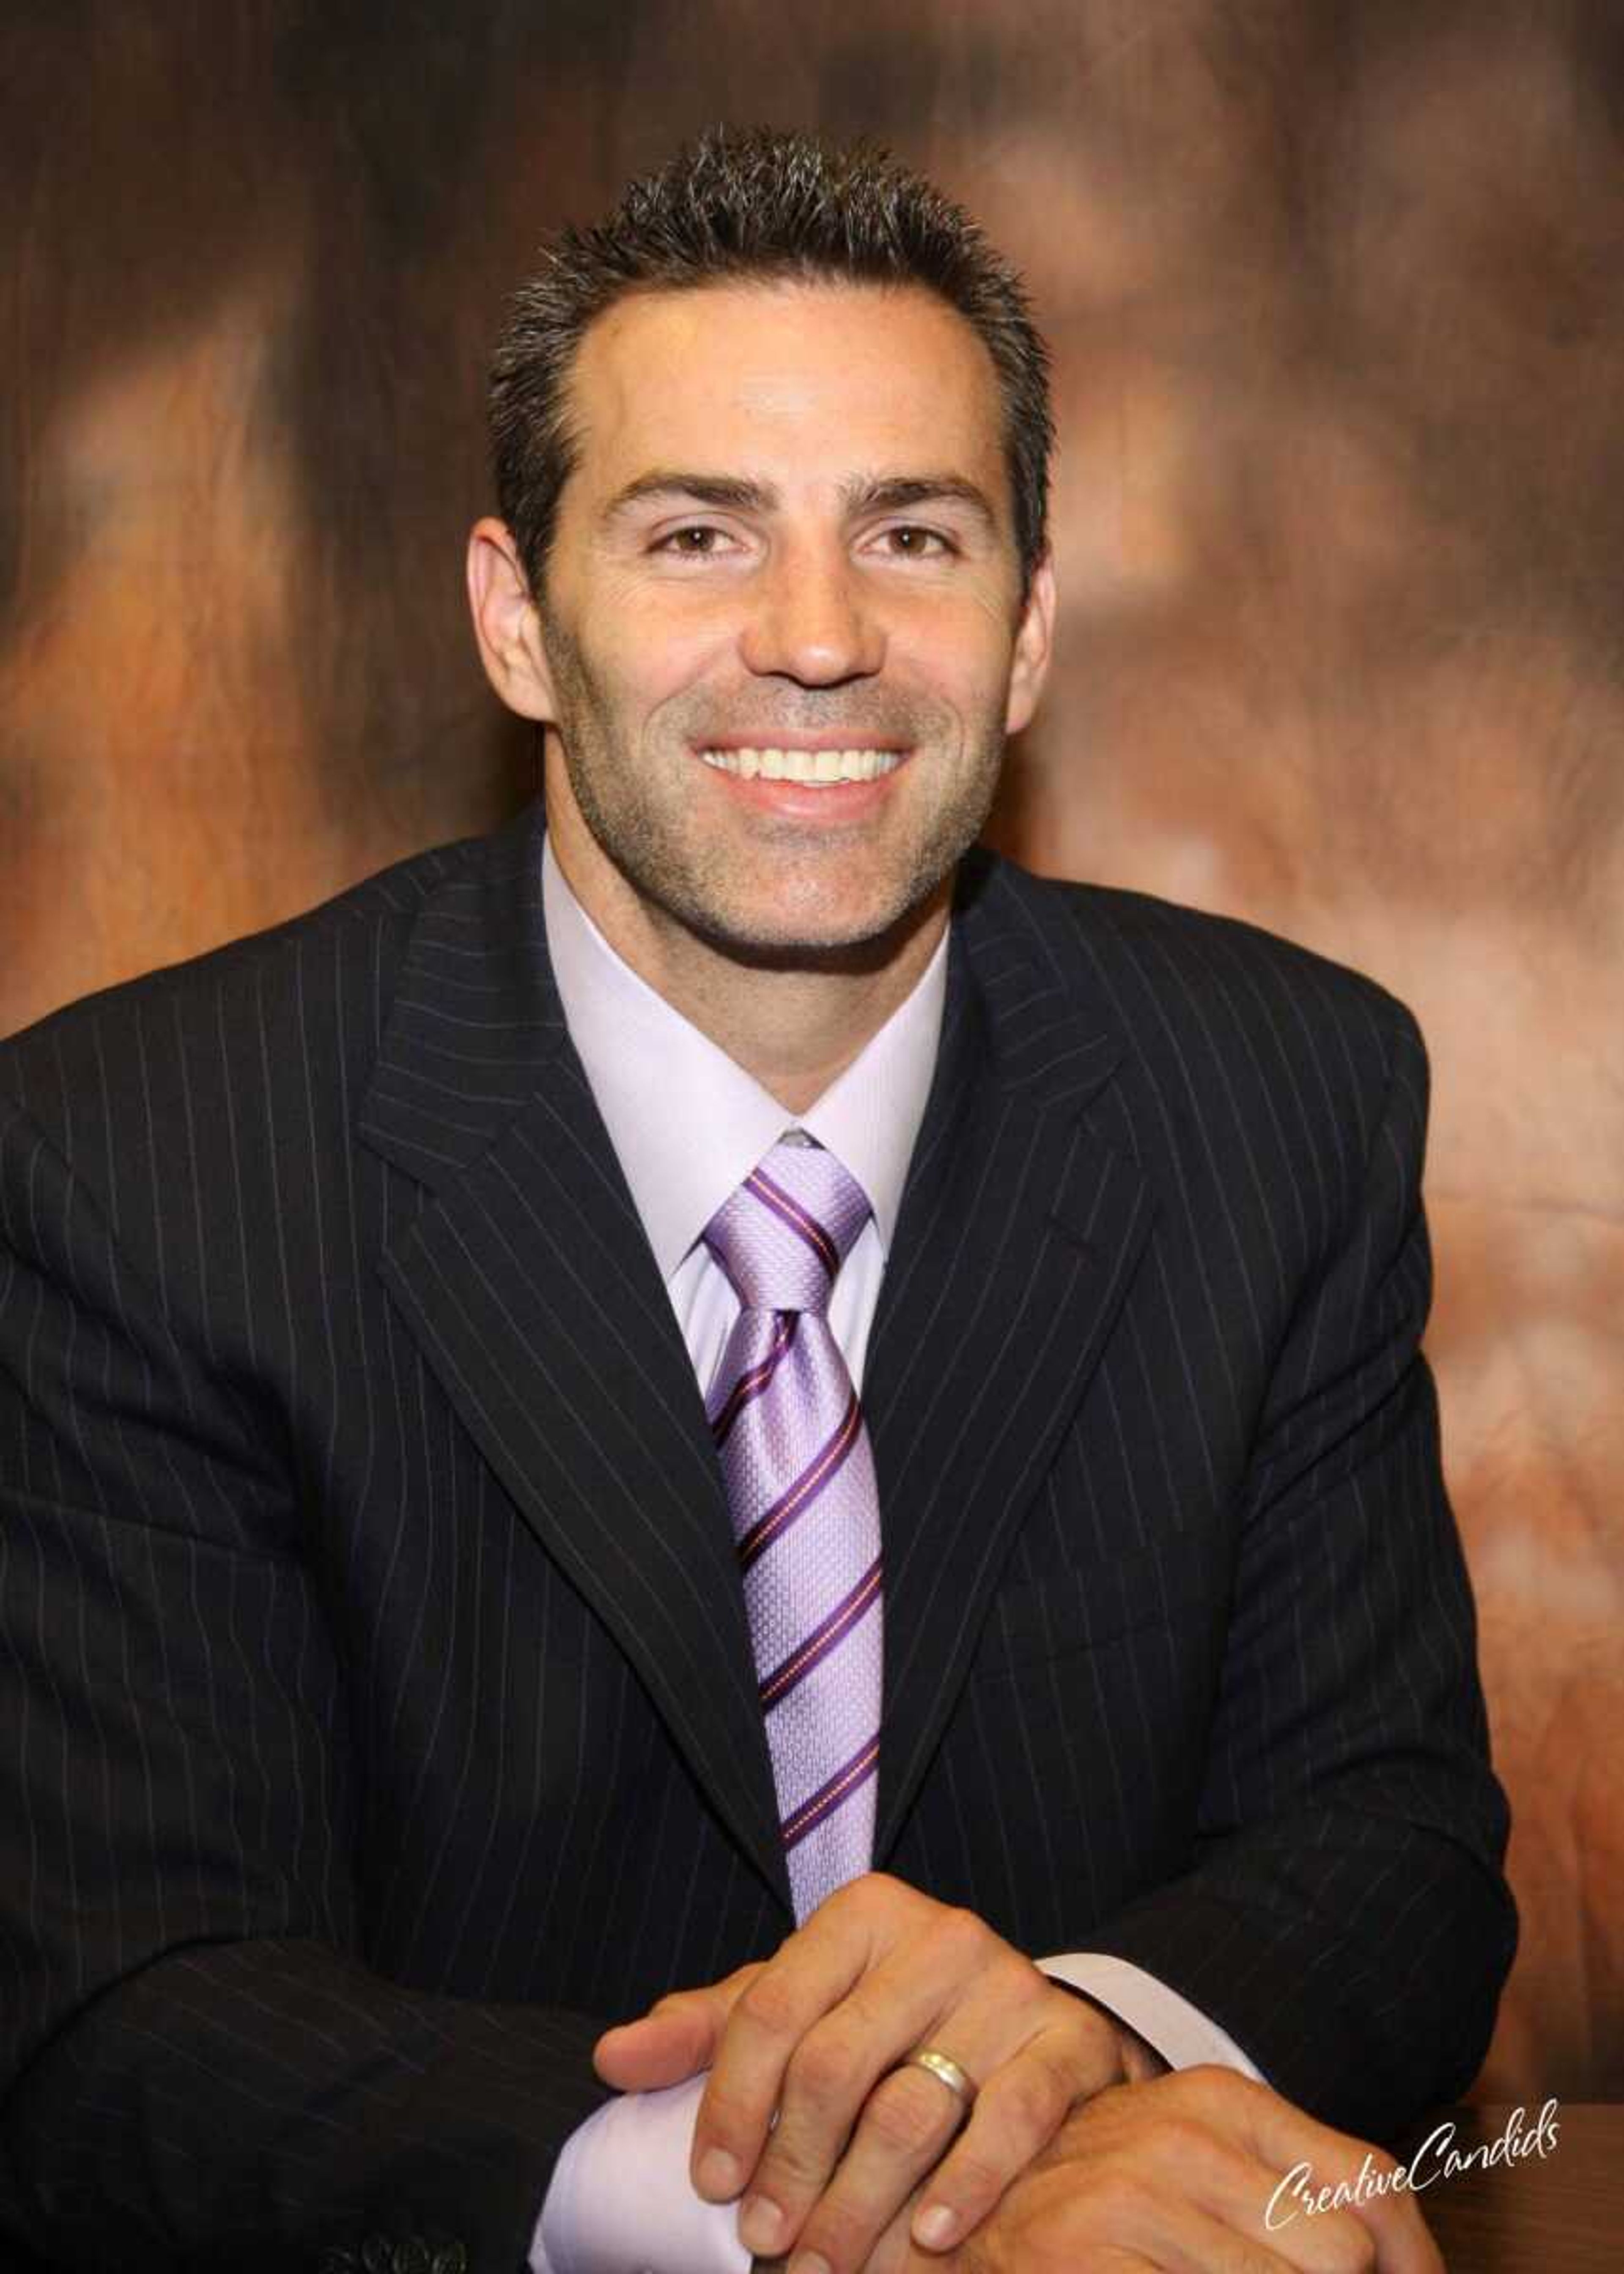 Kurt Warner is a retired quarterback. He played for the St. Louis Rams, Arizona Cardinals and New York Giants. - Submitted photo